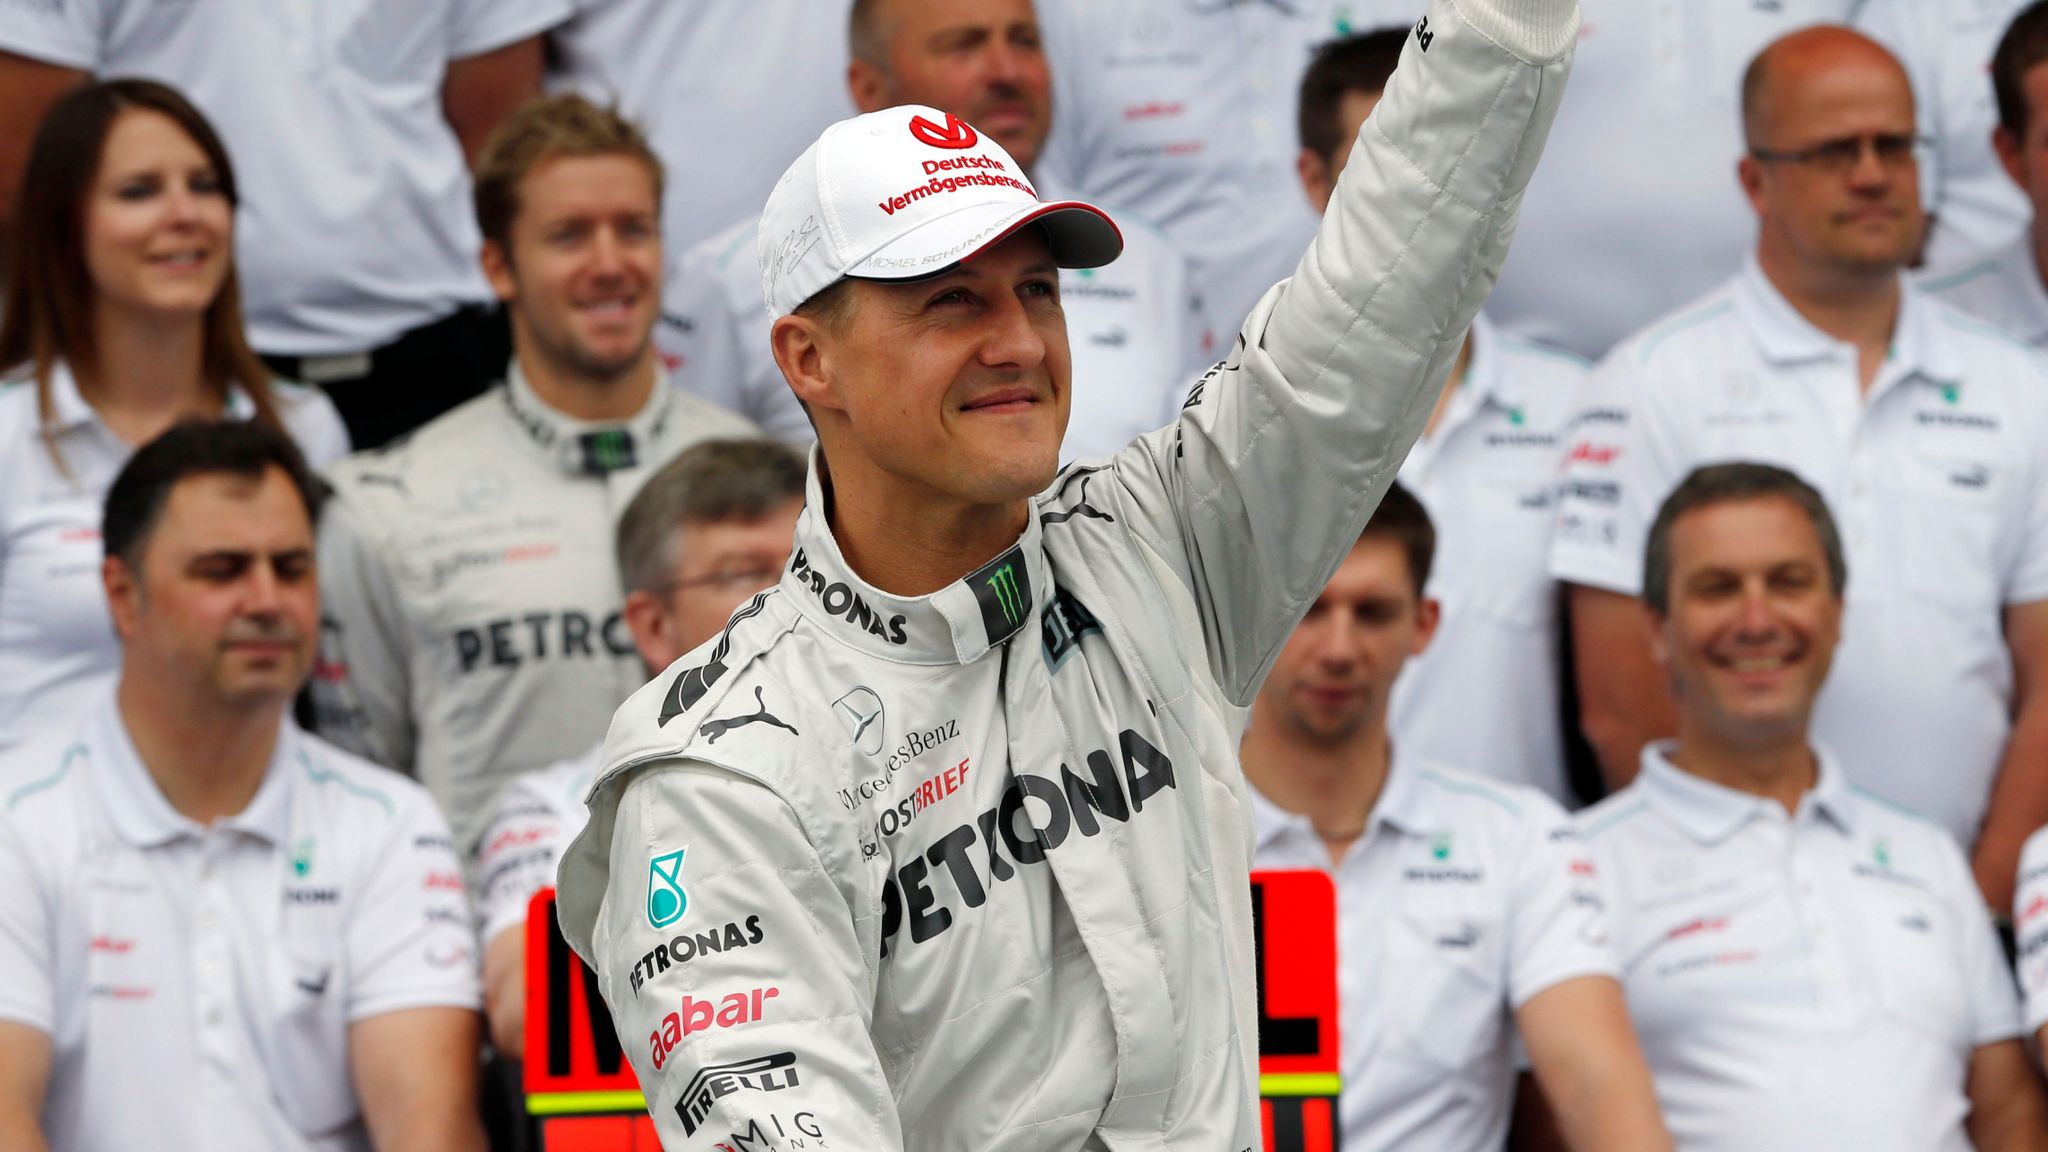 Michael Schumacher brought Mercedes together, says Williams F1 team ...